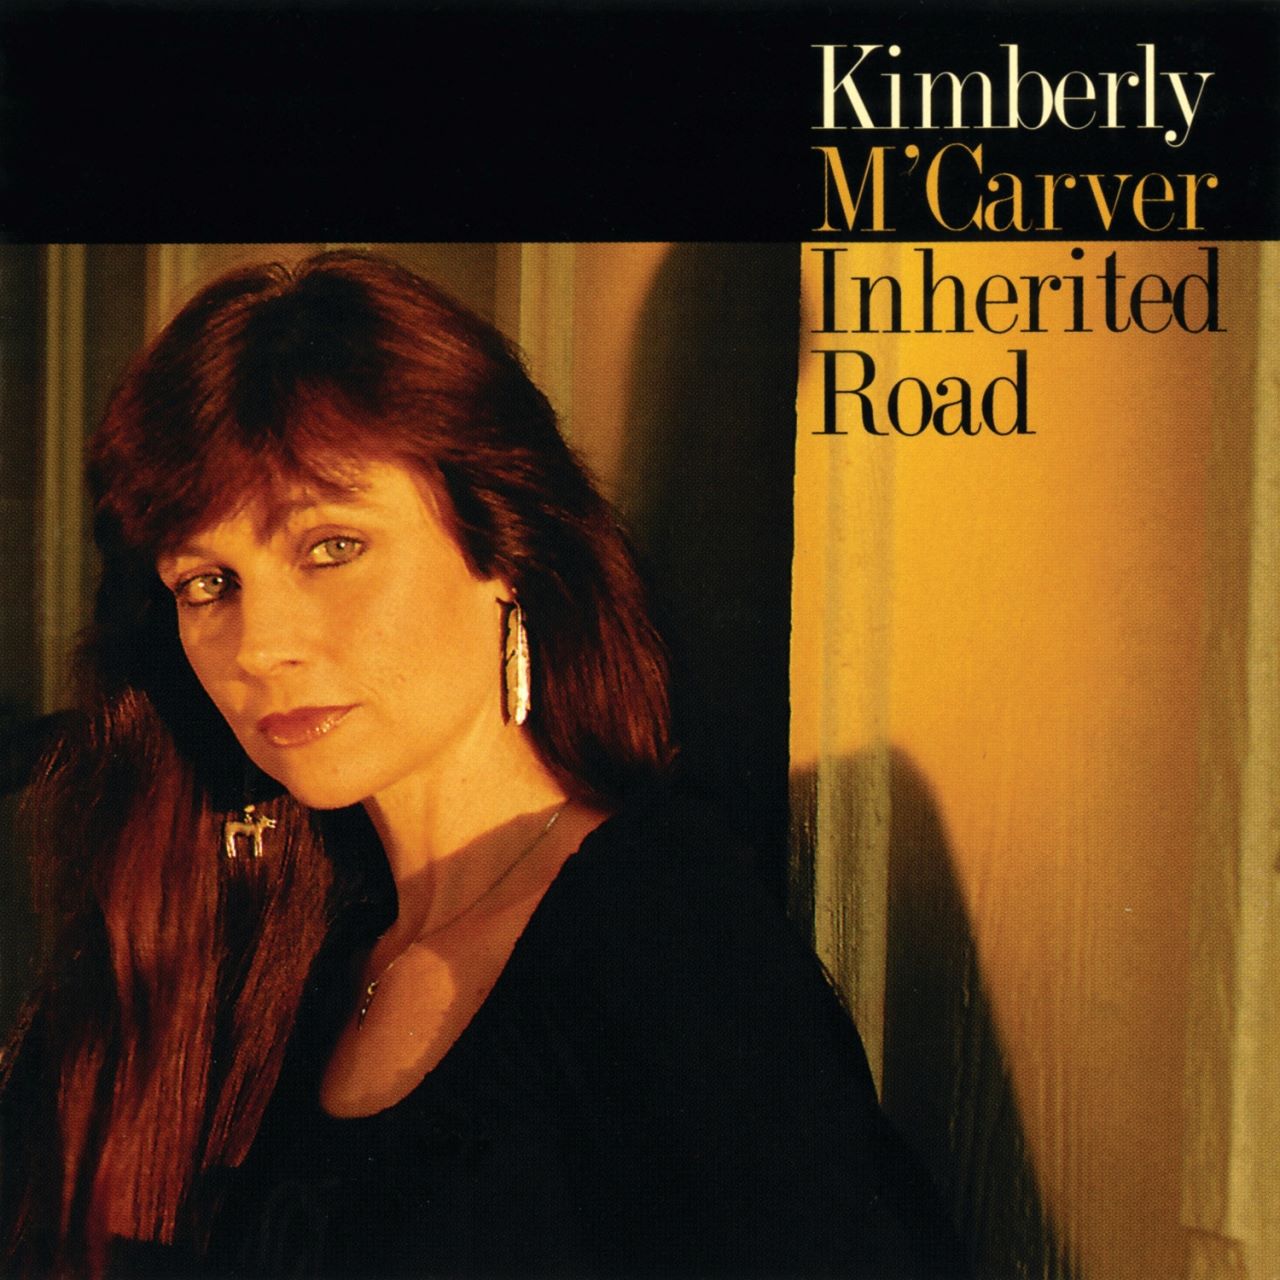 Kimberly M'Carver - Inherited Road cover album